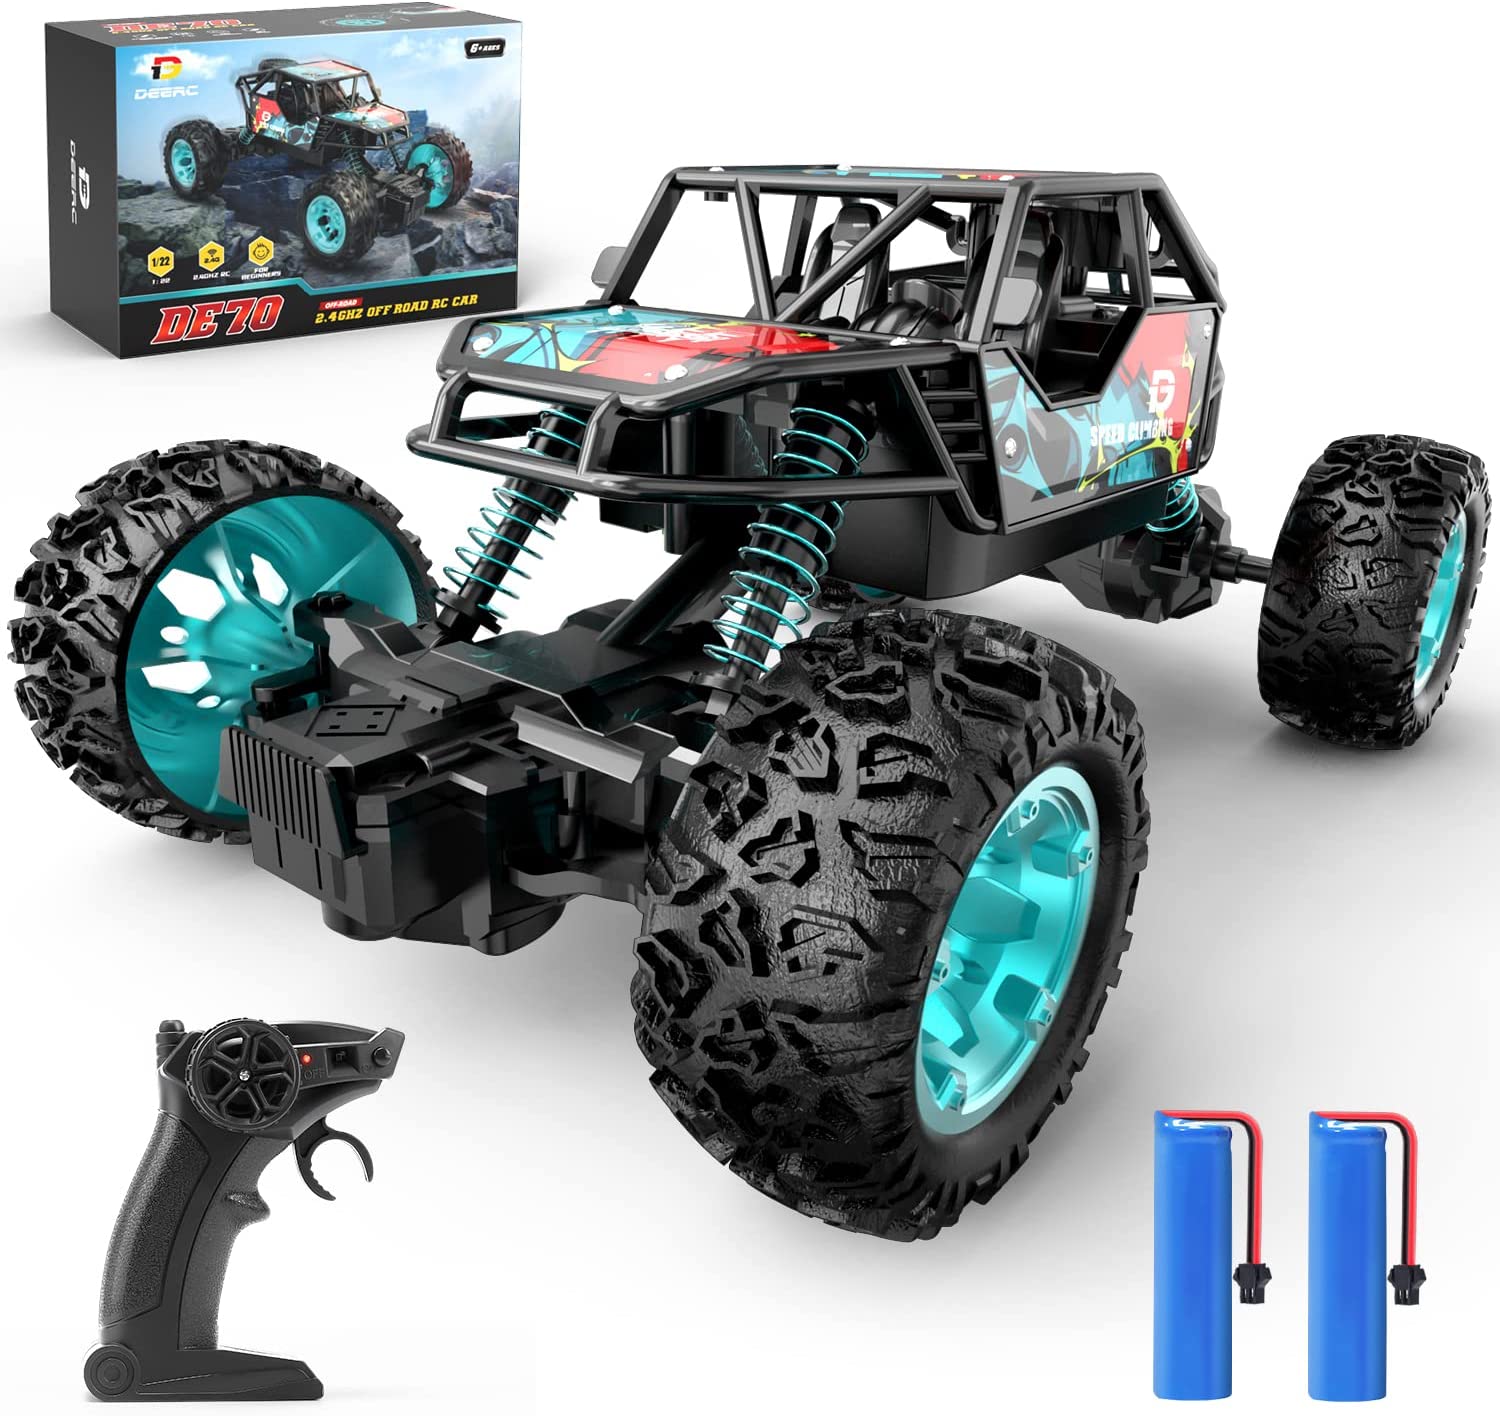 DEERC DE70 Remote Control Truck W/ Metal Shell, 60+ Mins, 2.4G Remote Control Car, 1:22 RC Cars Crawler for Boys, RC Monster Trucks, Toy Vehicle Car Gift for Kids Adults Girls